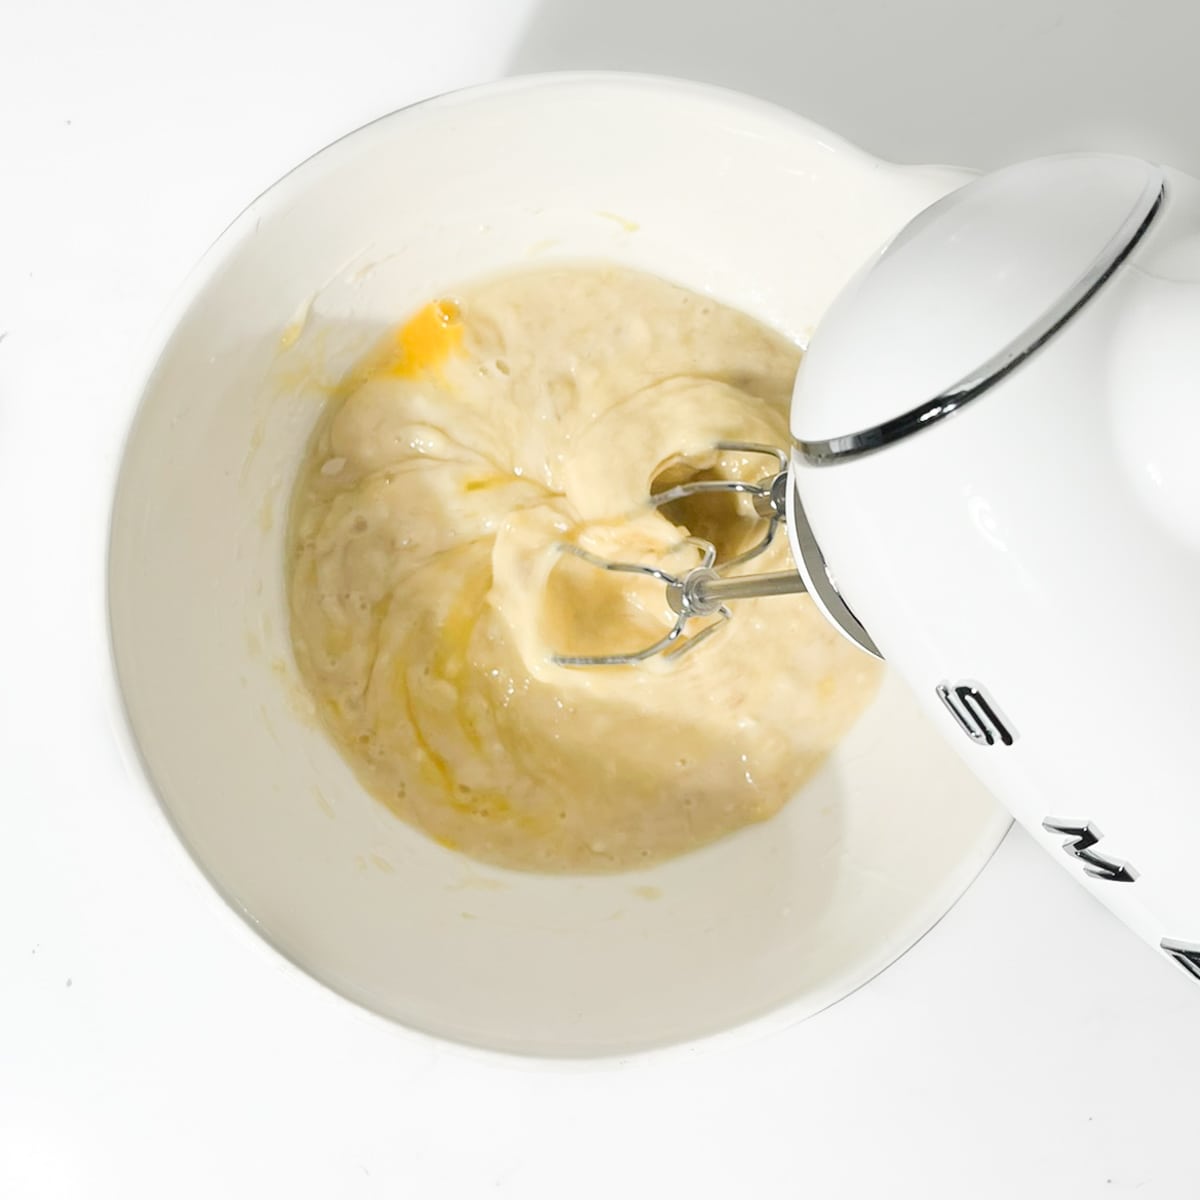 Beating the eggs into the banana mixture with an electric hand mixer.